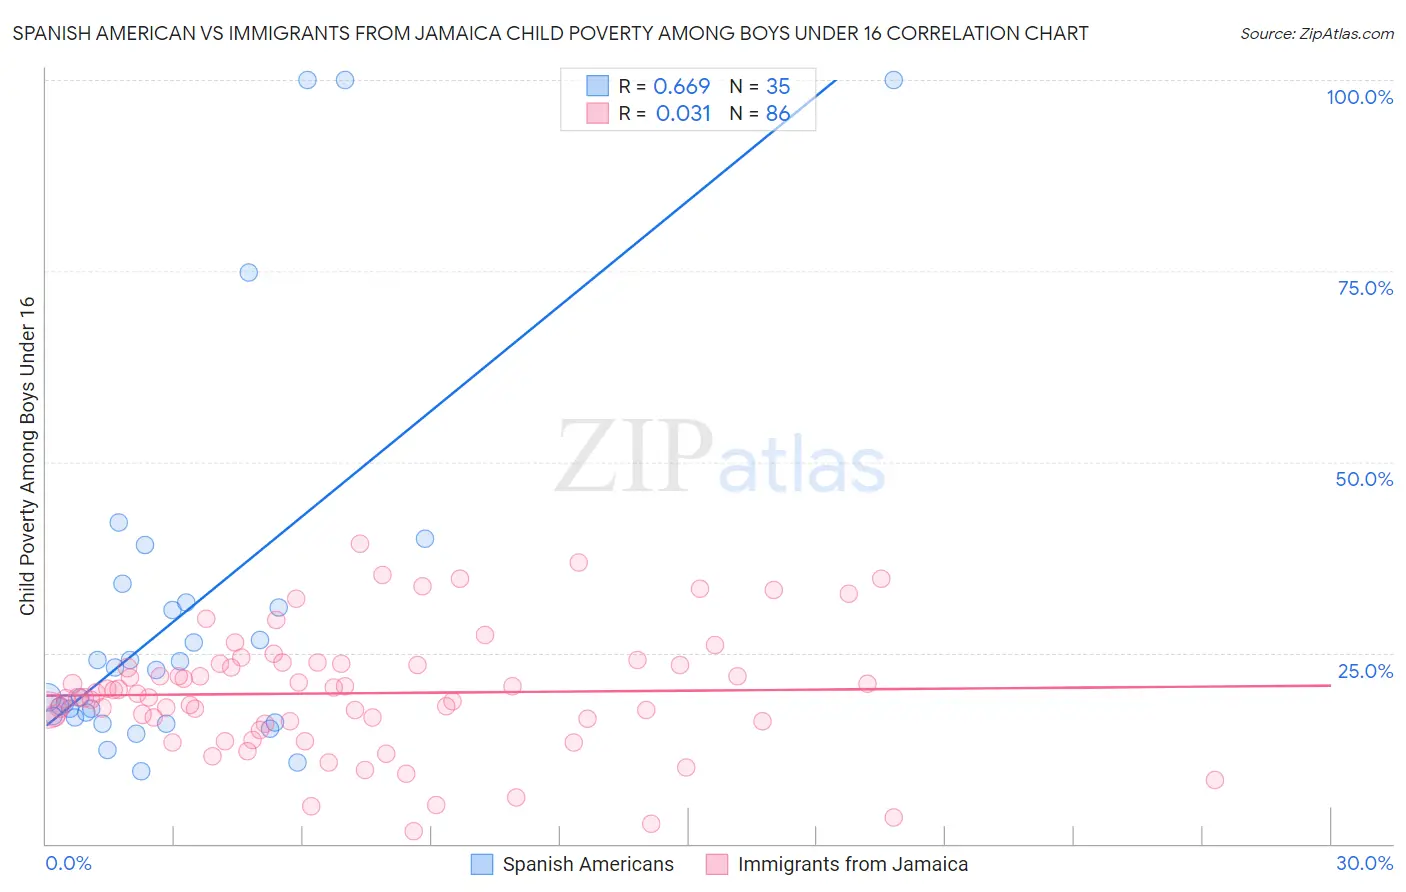 Spanish American vs Immigrants from Jamaica Child Poverty Among Boys Under 16